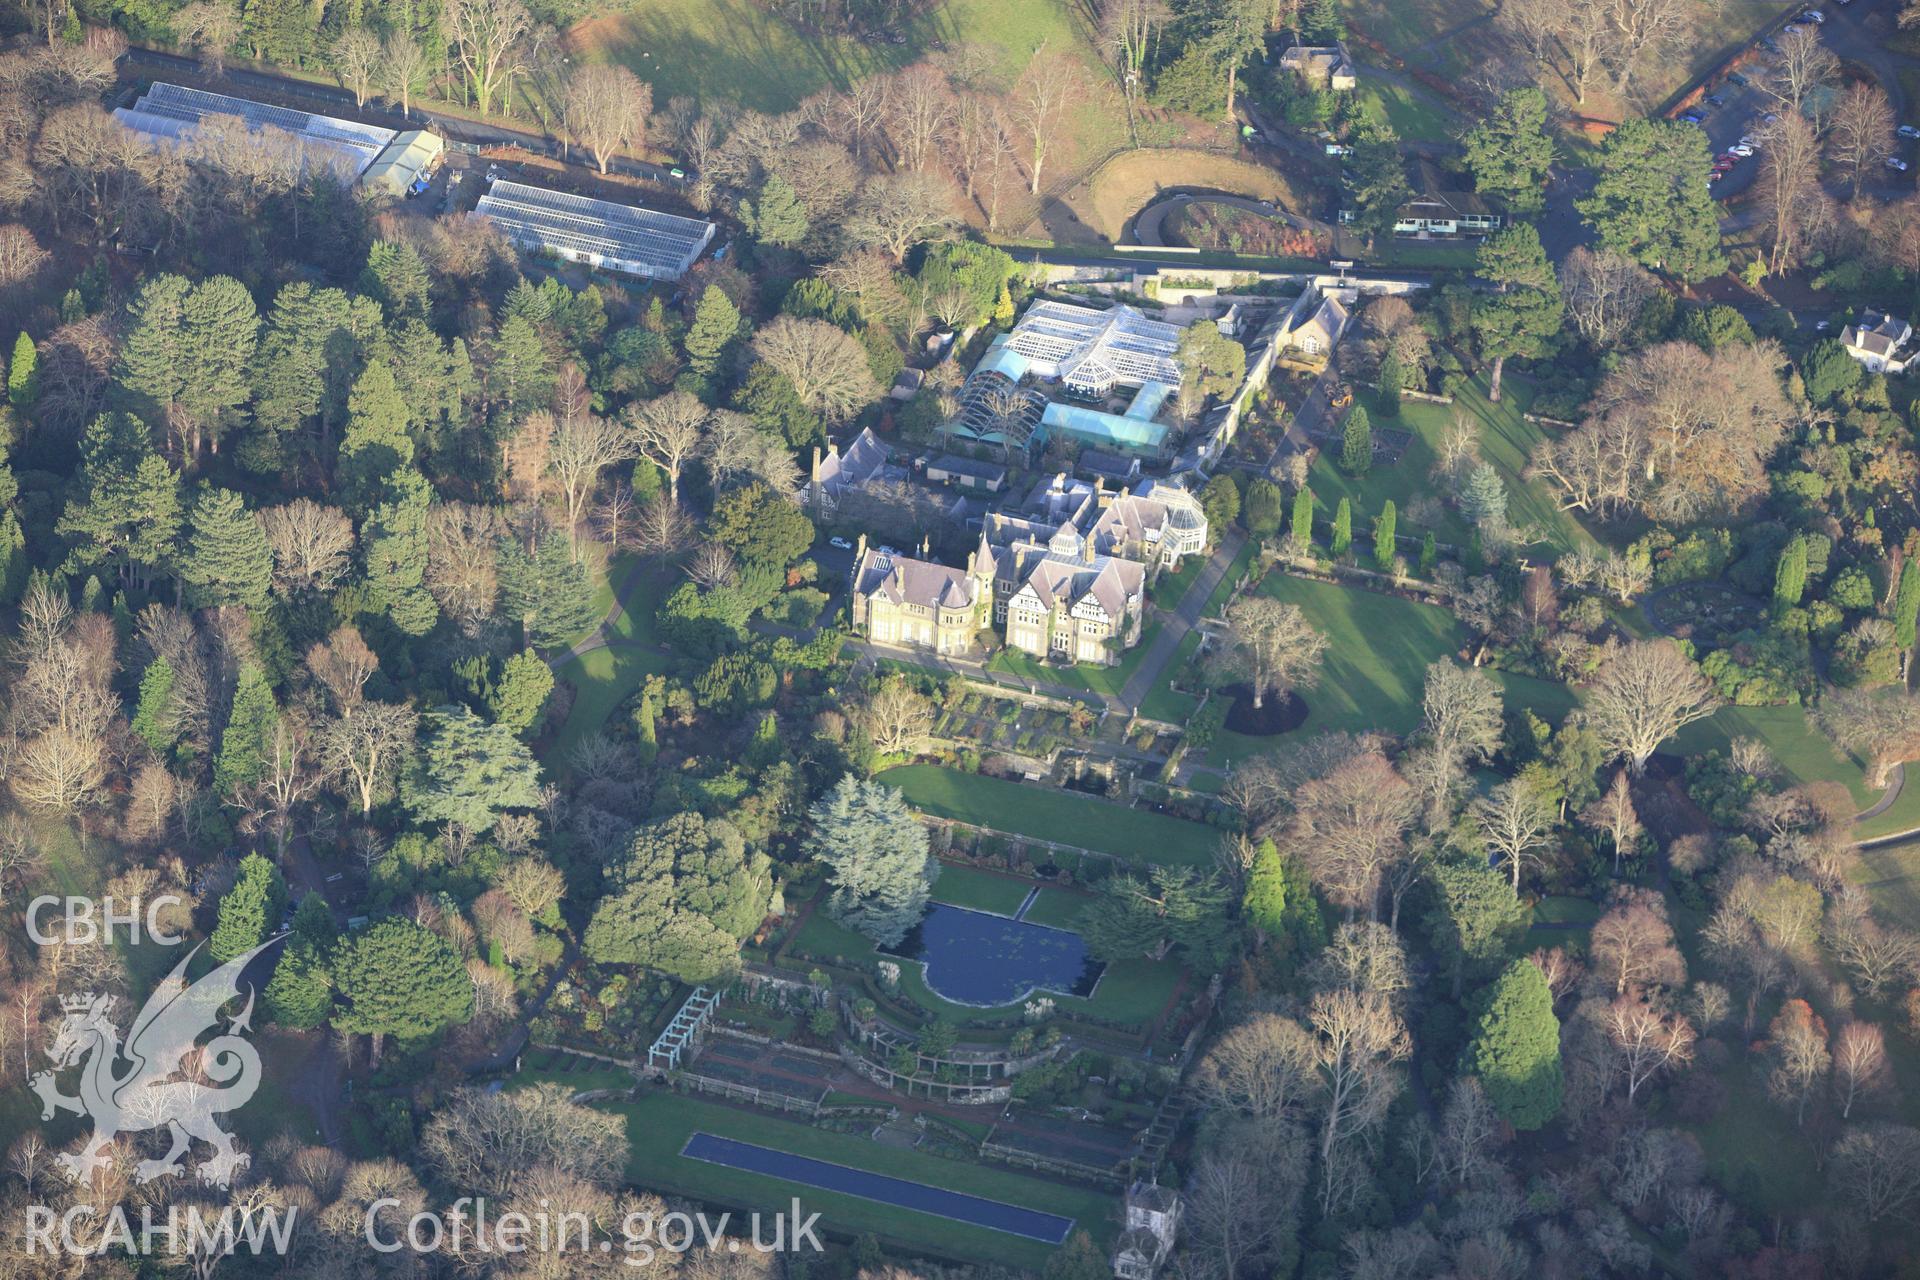 RCAHMW colour oblique aerial photograph of Bodnant House, Tal-y-Cafn. Taken on 10 December 2009 by Toby Driver